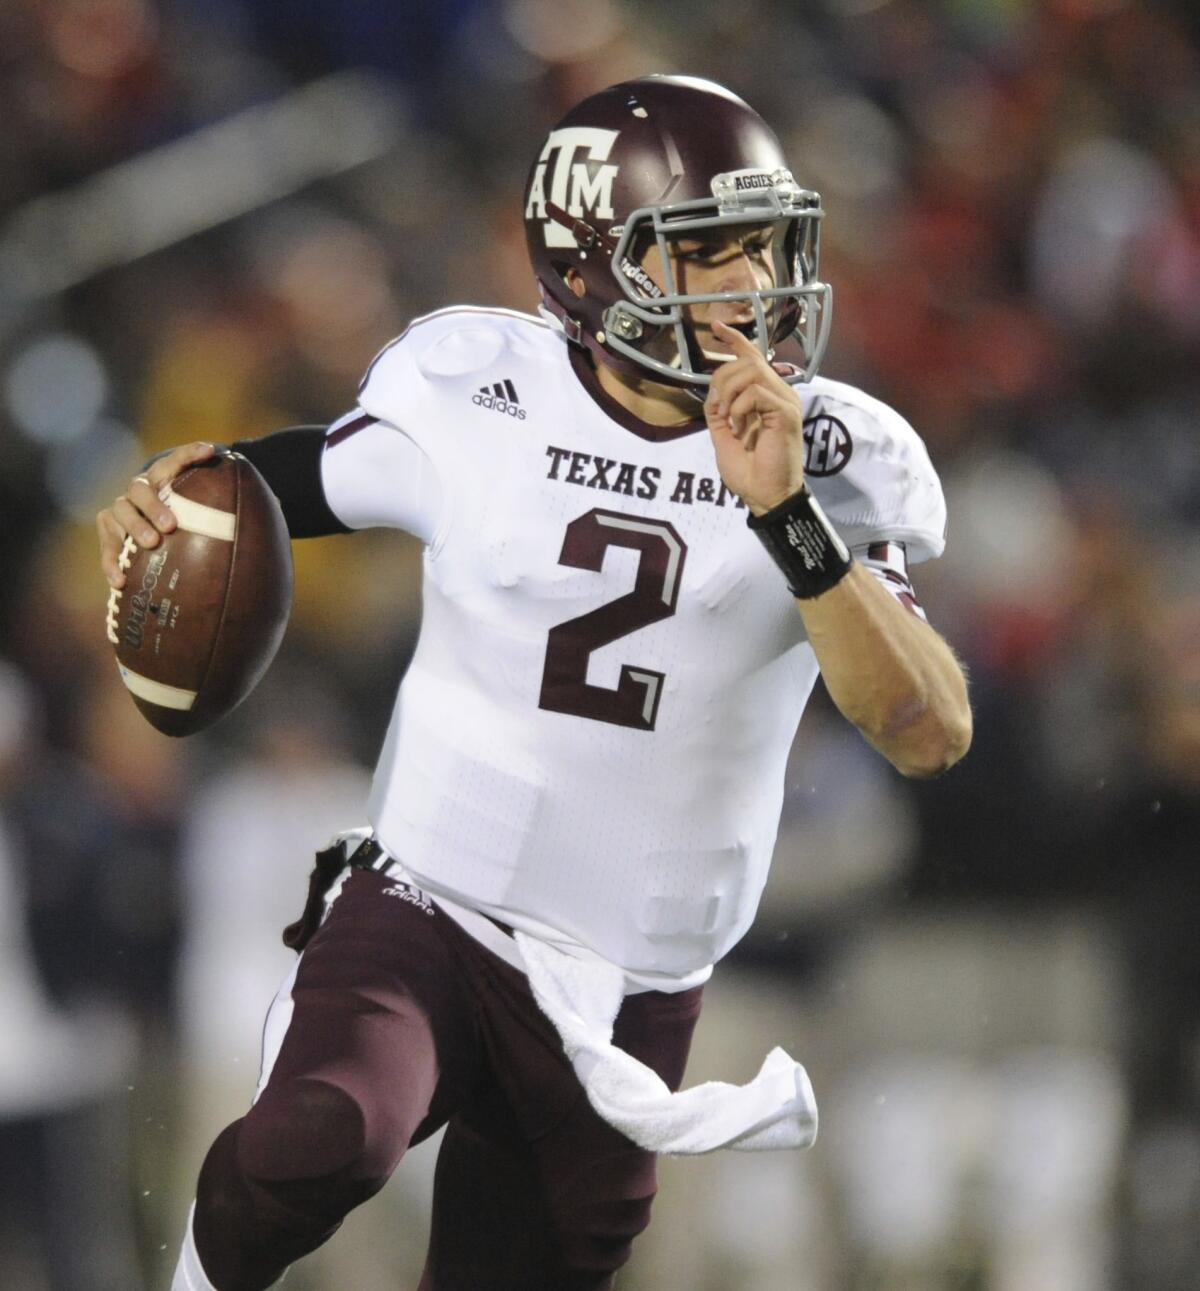 An autograph broker told ESPN that Texas A&M quarterback Johnny Manziel was paid for signing football helmets.